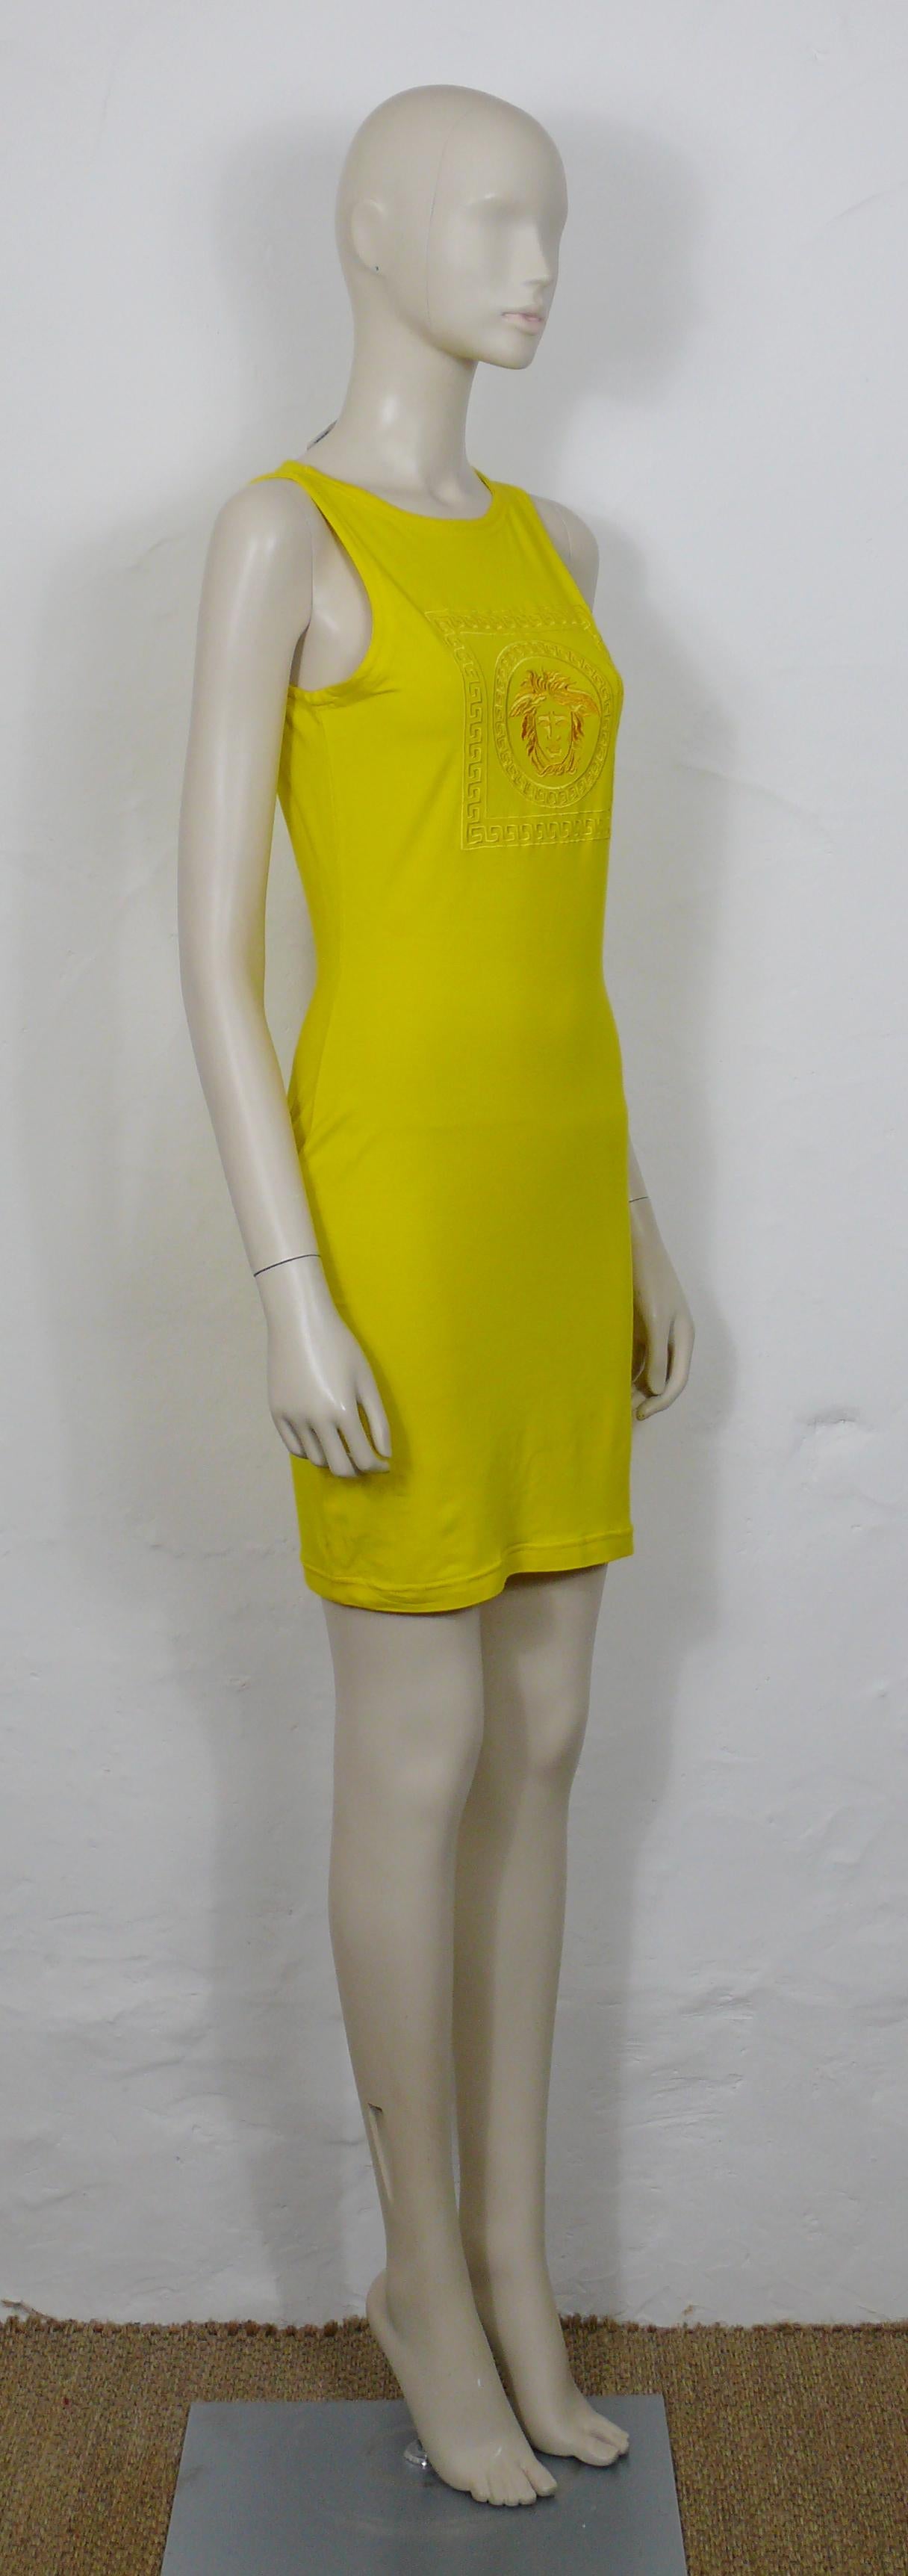 VERSACE JEANS COUTURE vintage yellow bodycon dress featuring an iconic embroidered MEDUSA.

Slips on.
Stretchy fabric.

Label reads VERSACE JEANS COUTURE.
Made in Italy.

Size tag reads : 32/46.
Please refer to measurements.

Composition tags read :